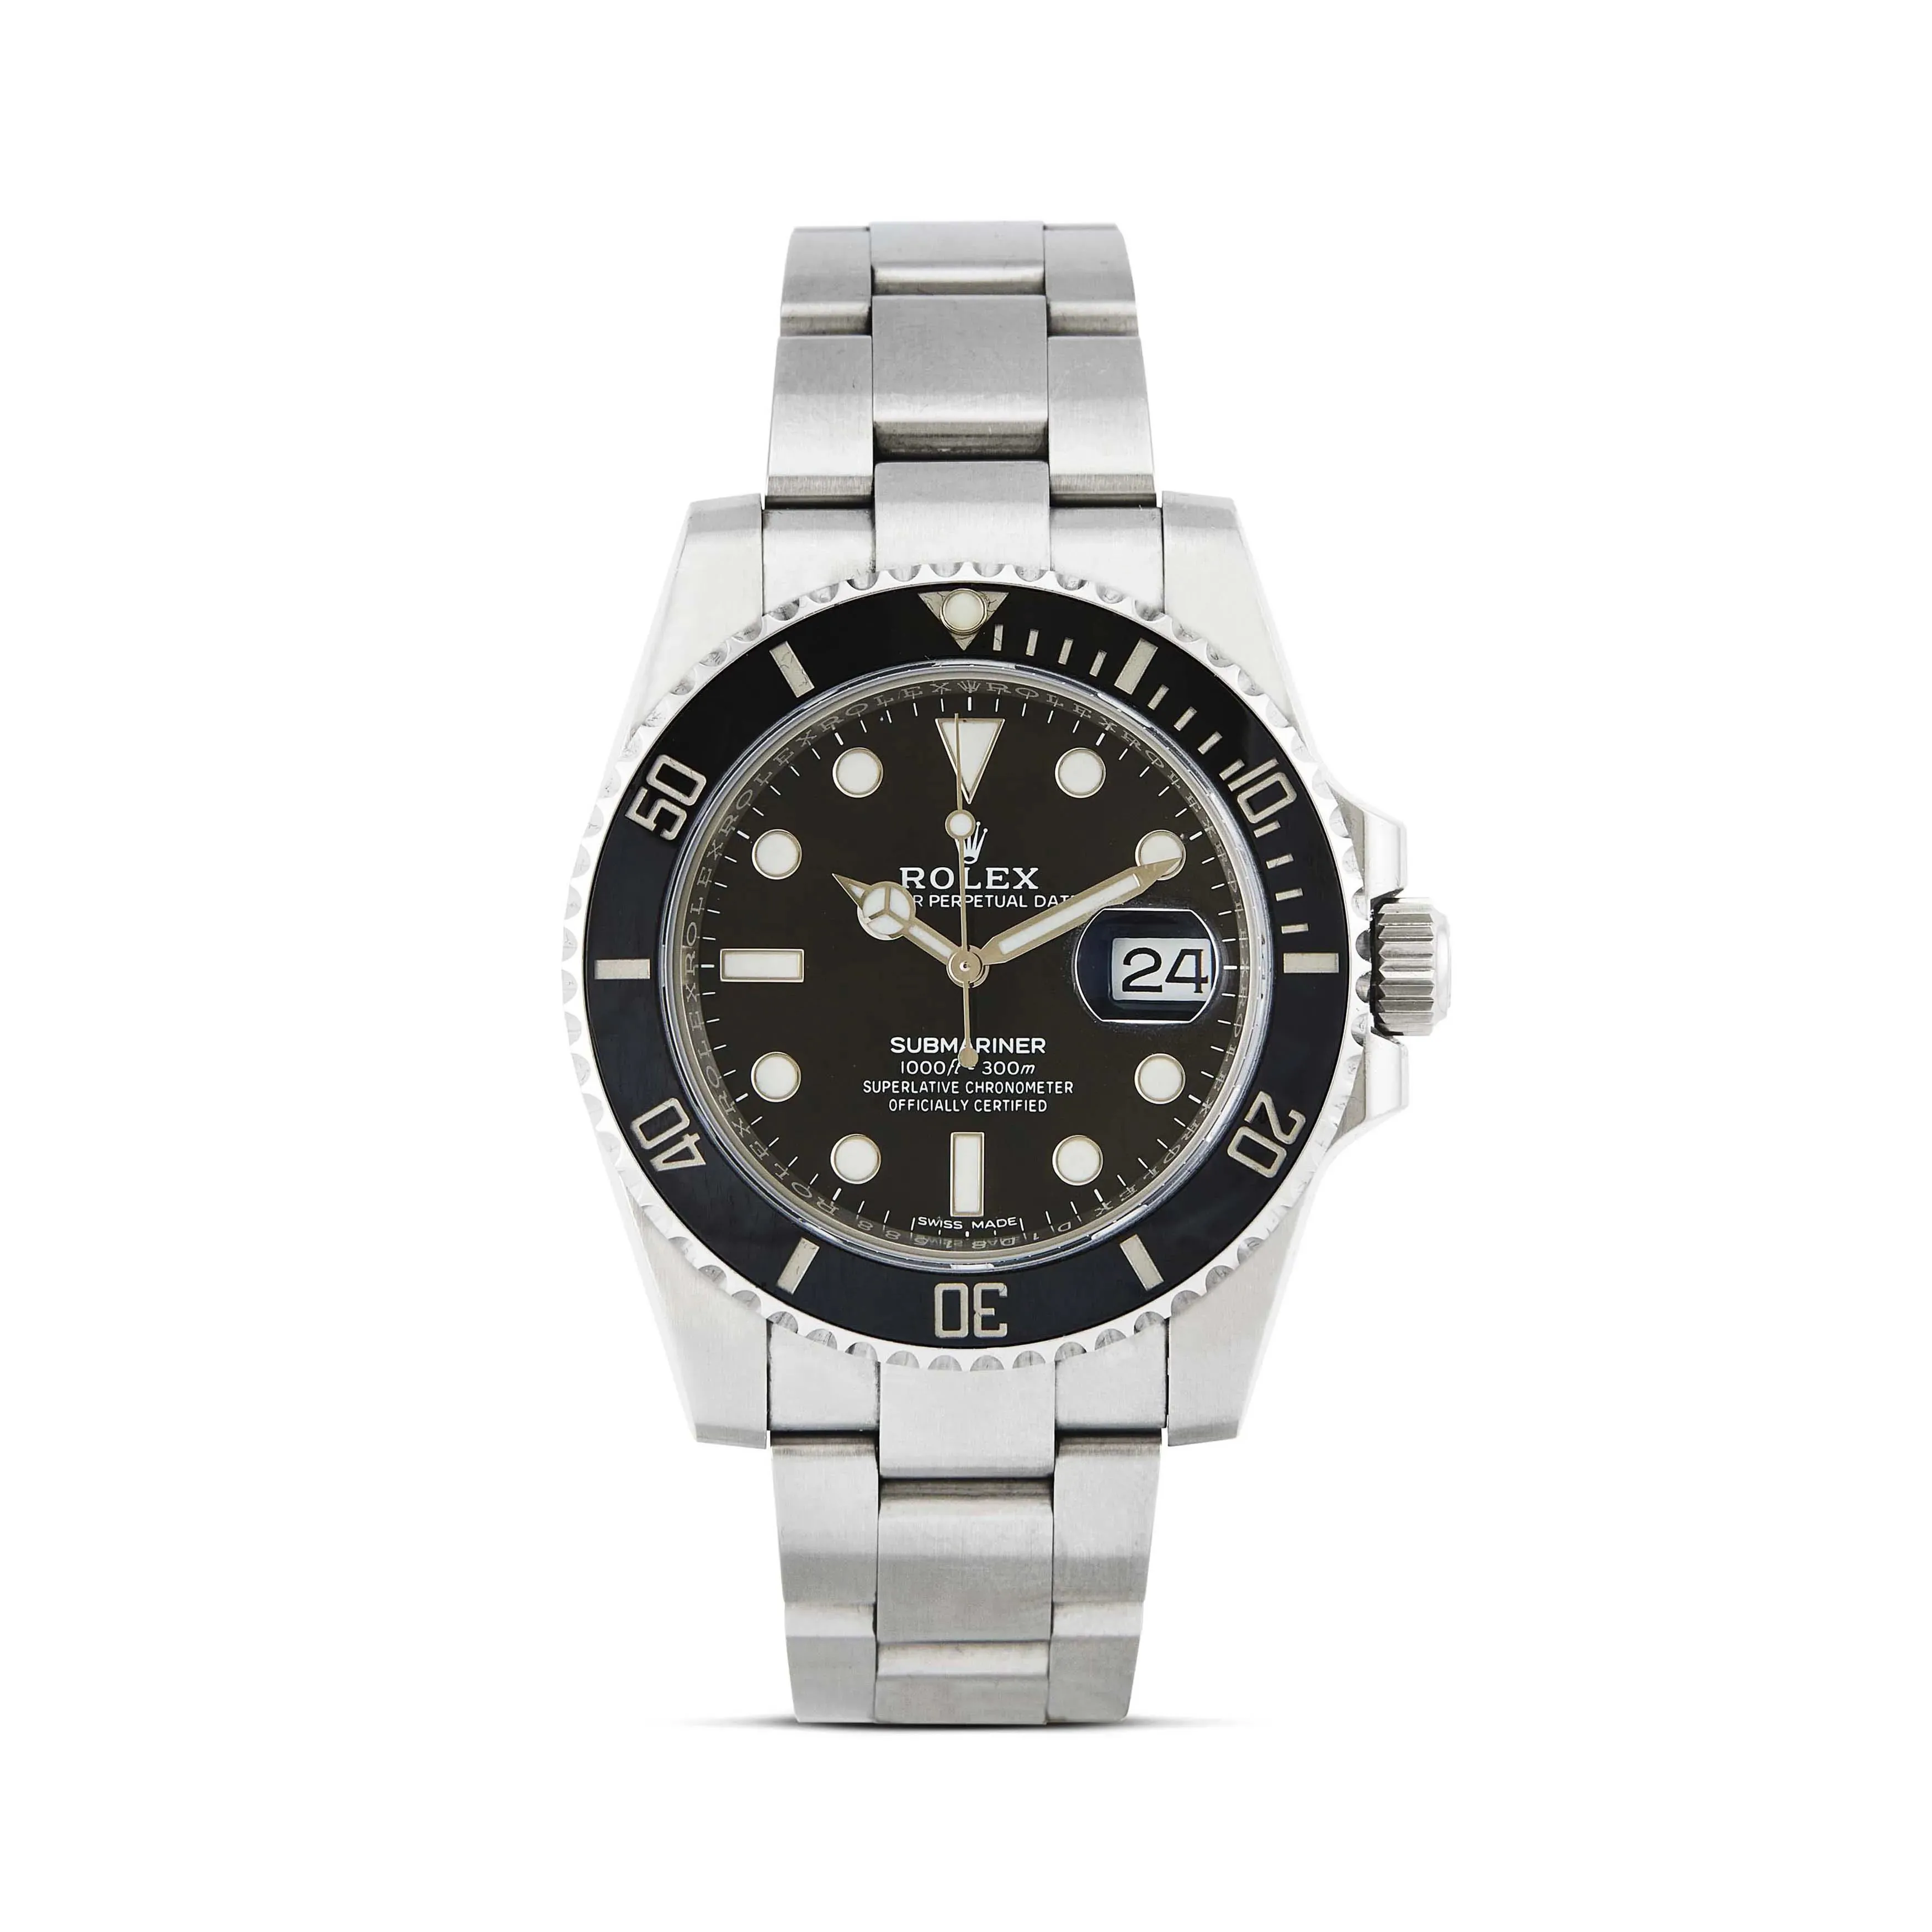 Rolex Submariner 116610LN 40mm Stainless steel and ceramic Black